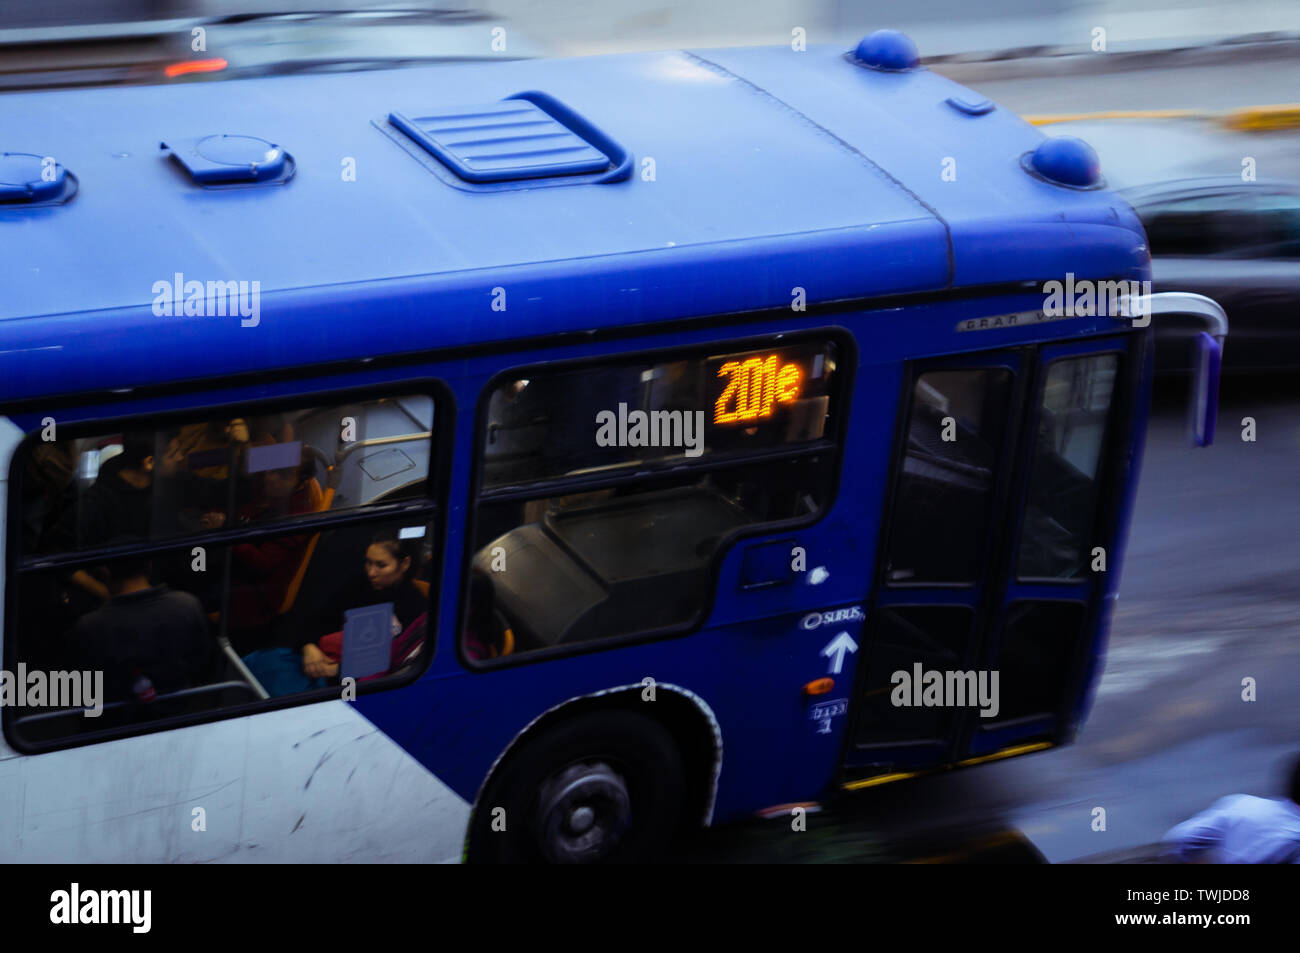 SANTIAGO, CHILE - MAY 2018: Top view of a Transantiago bus Stock Photo